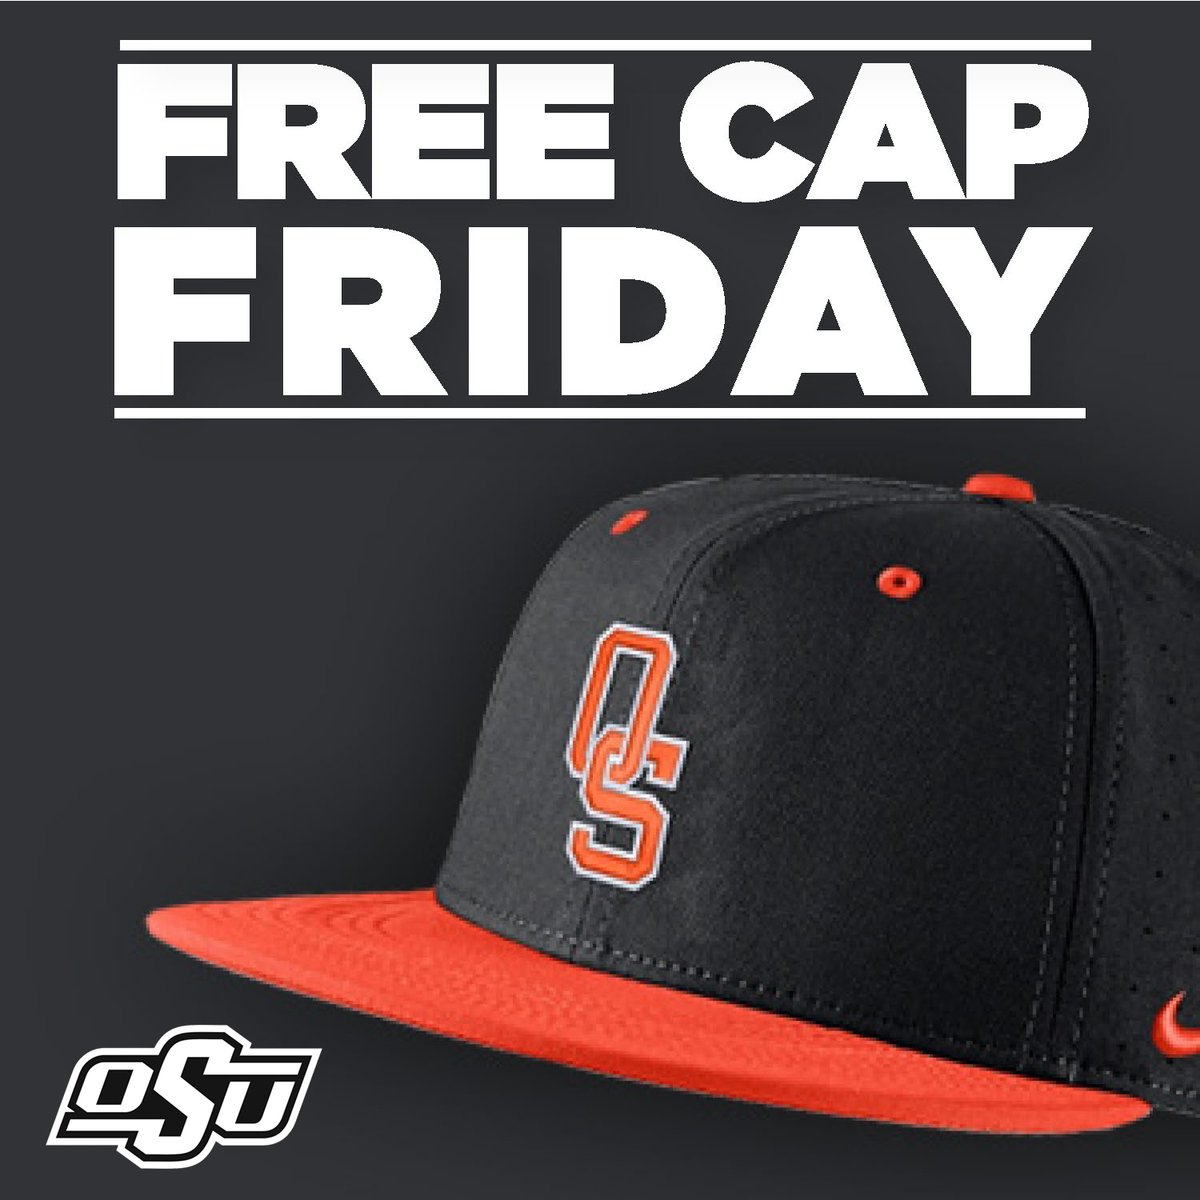 Free Cap Friday! RT & Like for chance to win this @OSUBaseball hat from the @OSUUnion. bit.ly/2ZQQViv #MakeItHappen I #GoPokes